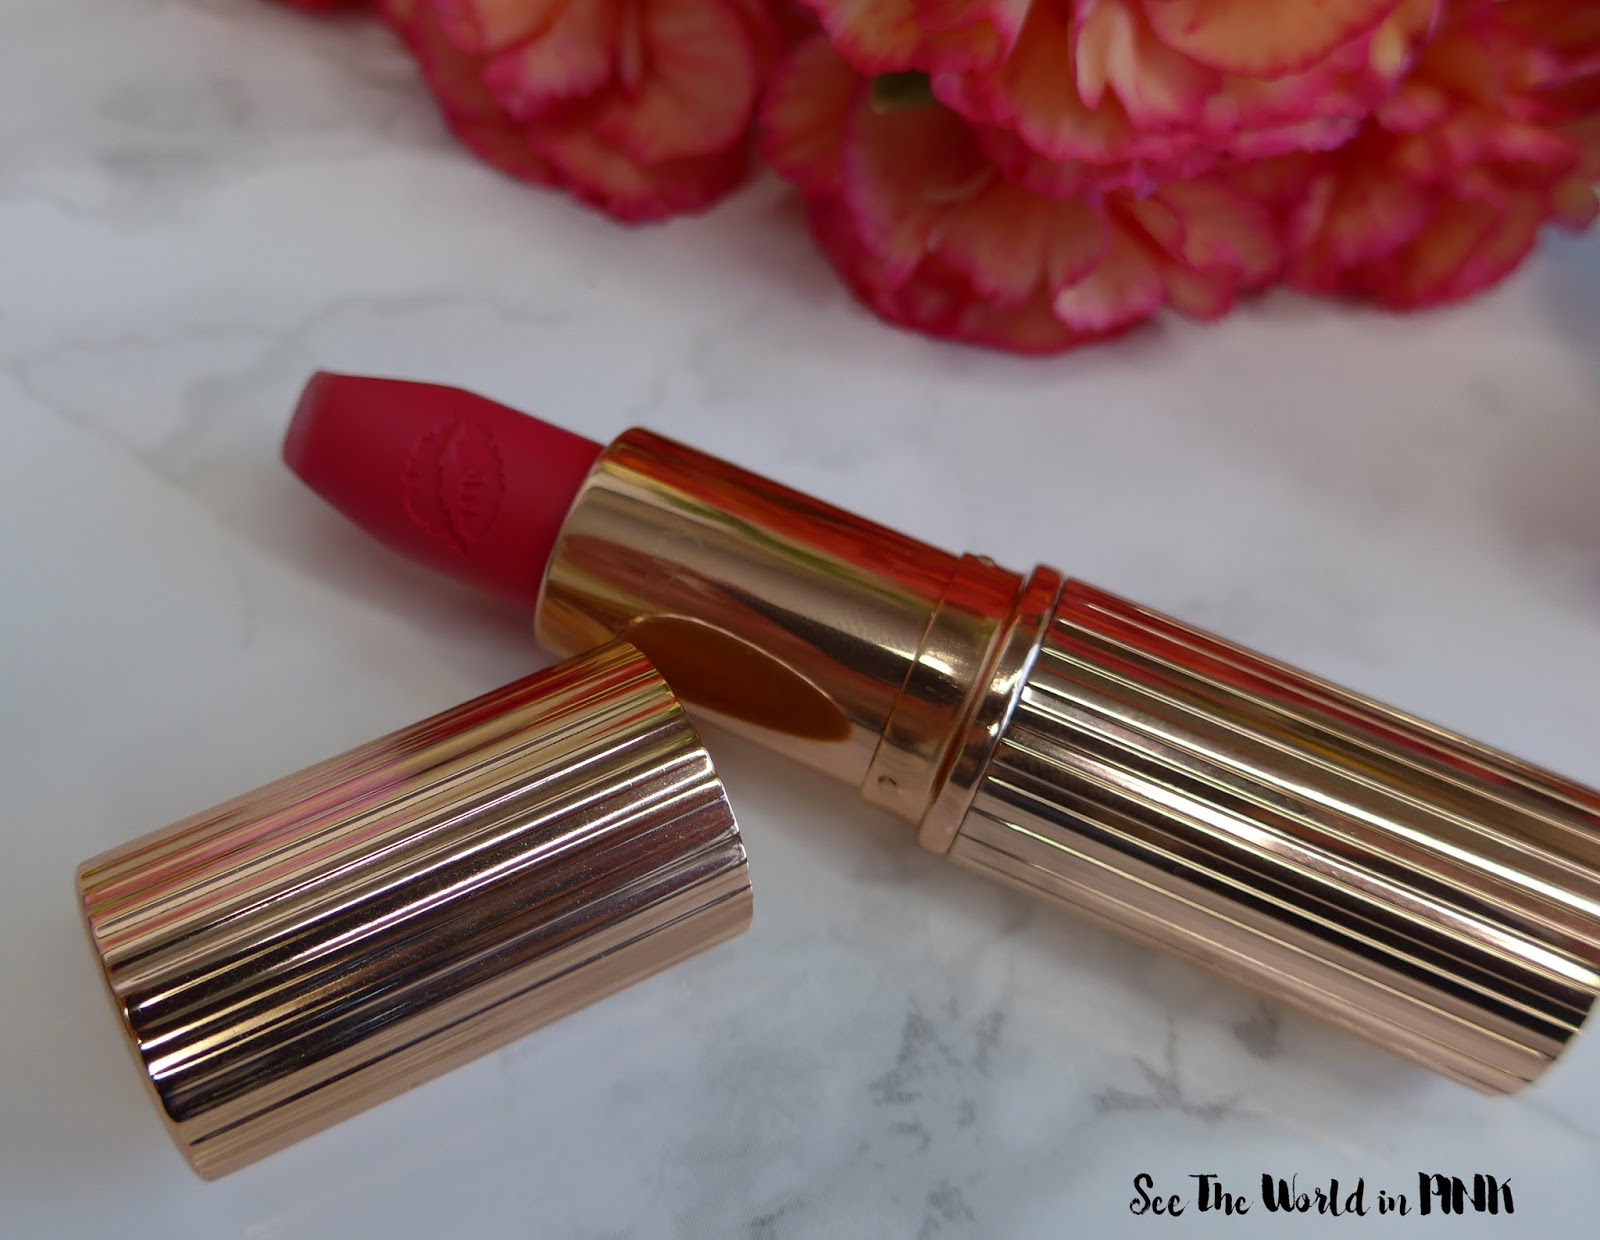 Charlotte Tibury "Hot Lips" Lipstick in Electric Poppy - Bright Pink Lips for Spring! 